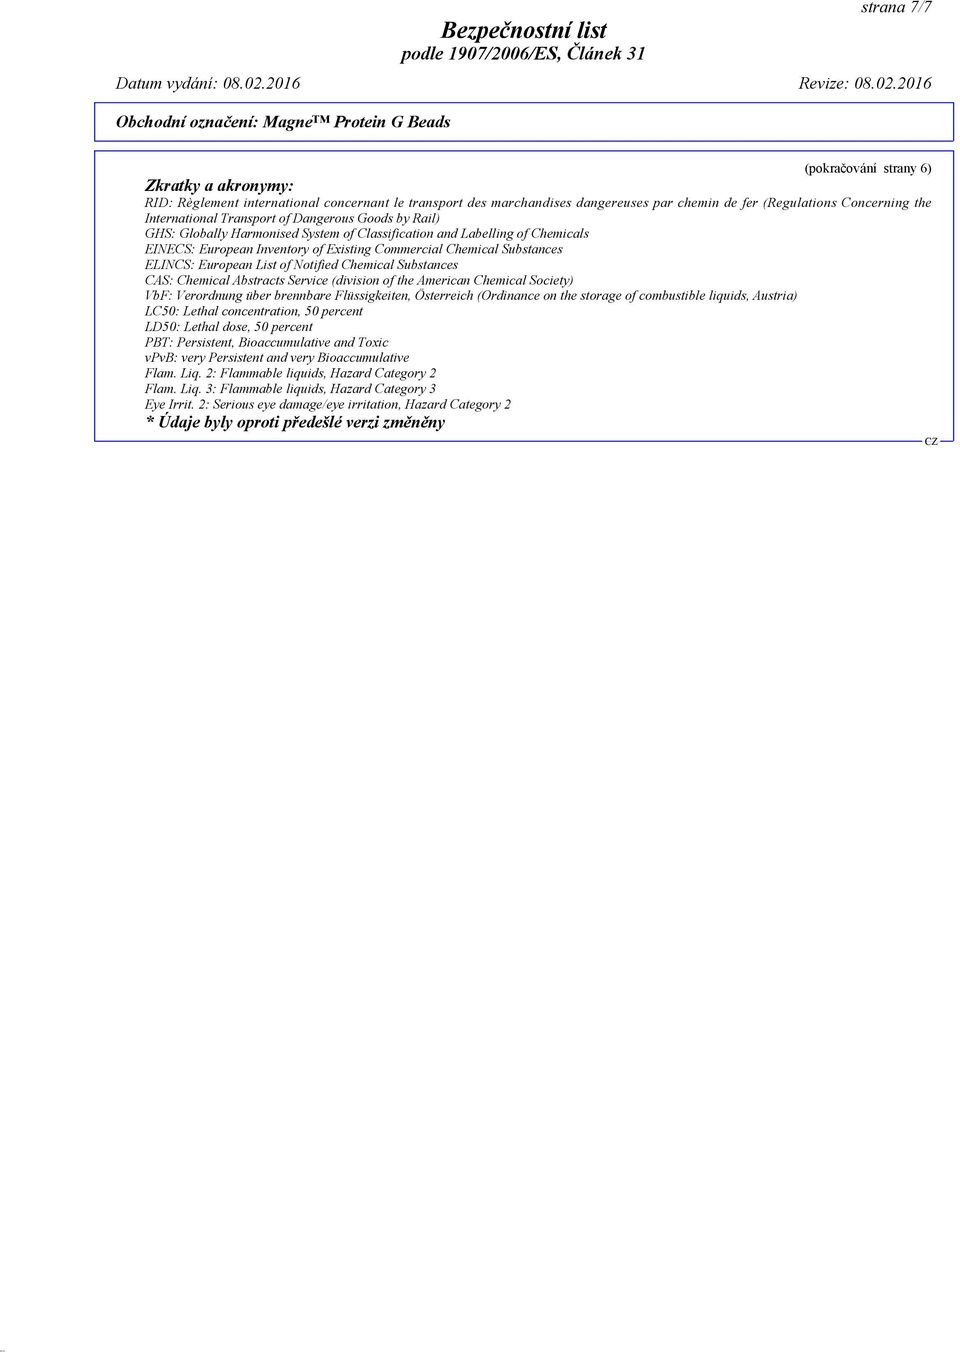 European List of Notified Chemical Substances CAS: Chemical Abstracts Service (division of the American Chemical Society) VbF: Verordnung über brennbare Flüssigkeiten, Österreich (Ordinance on the